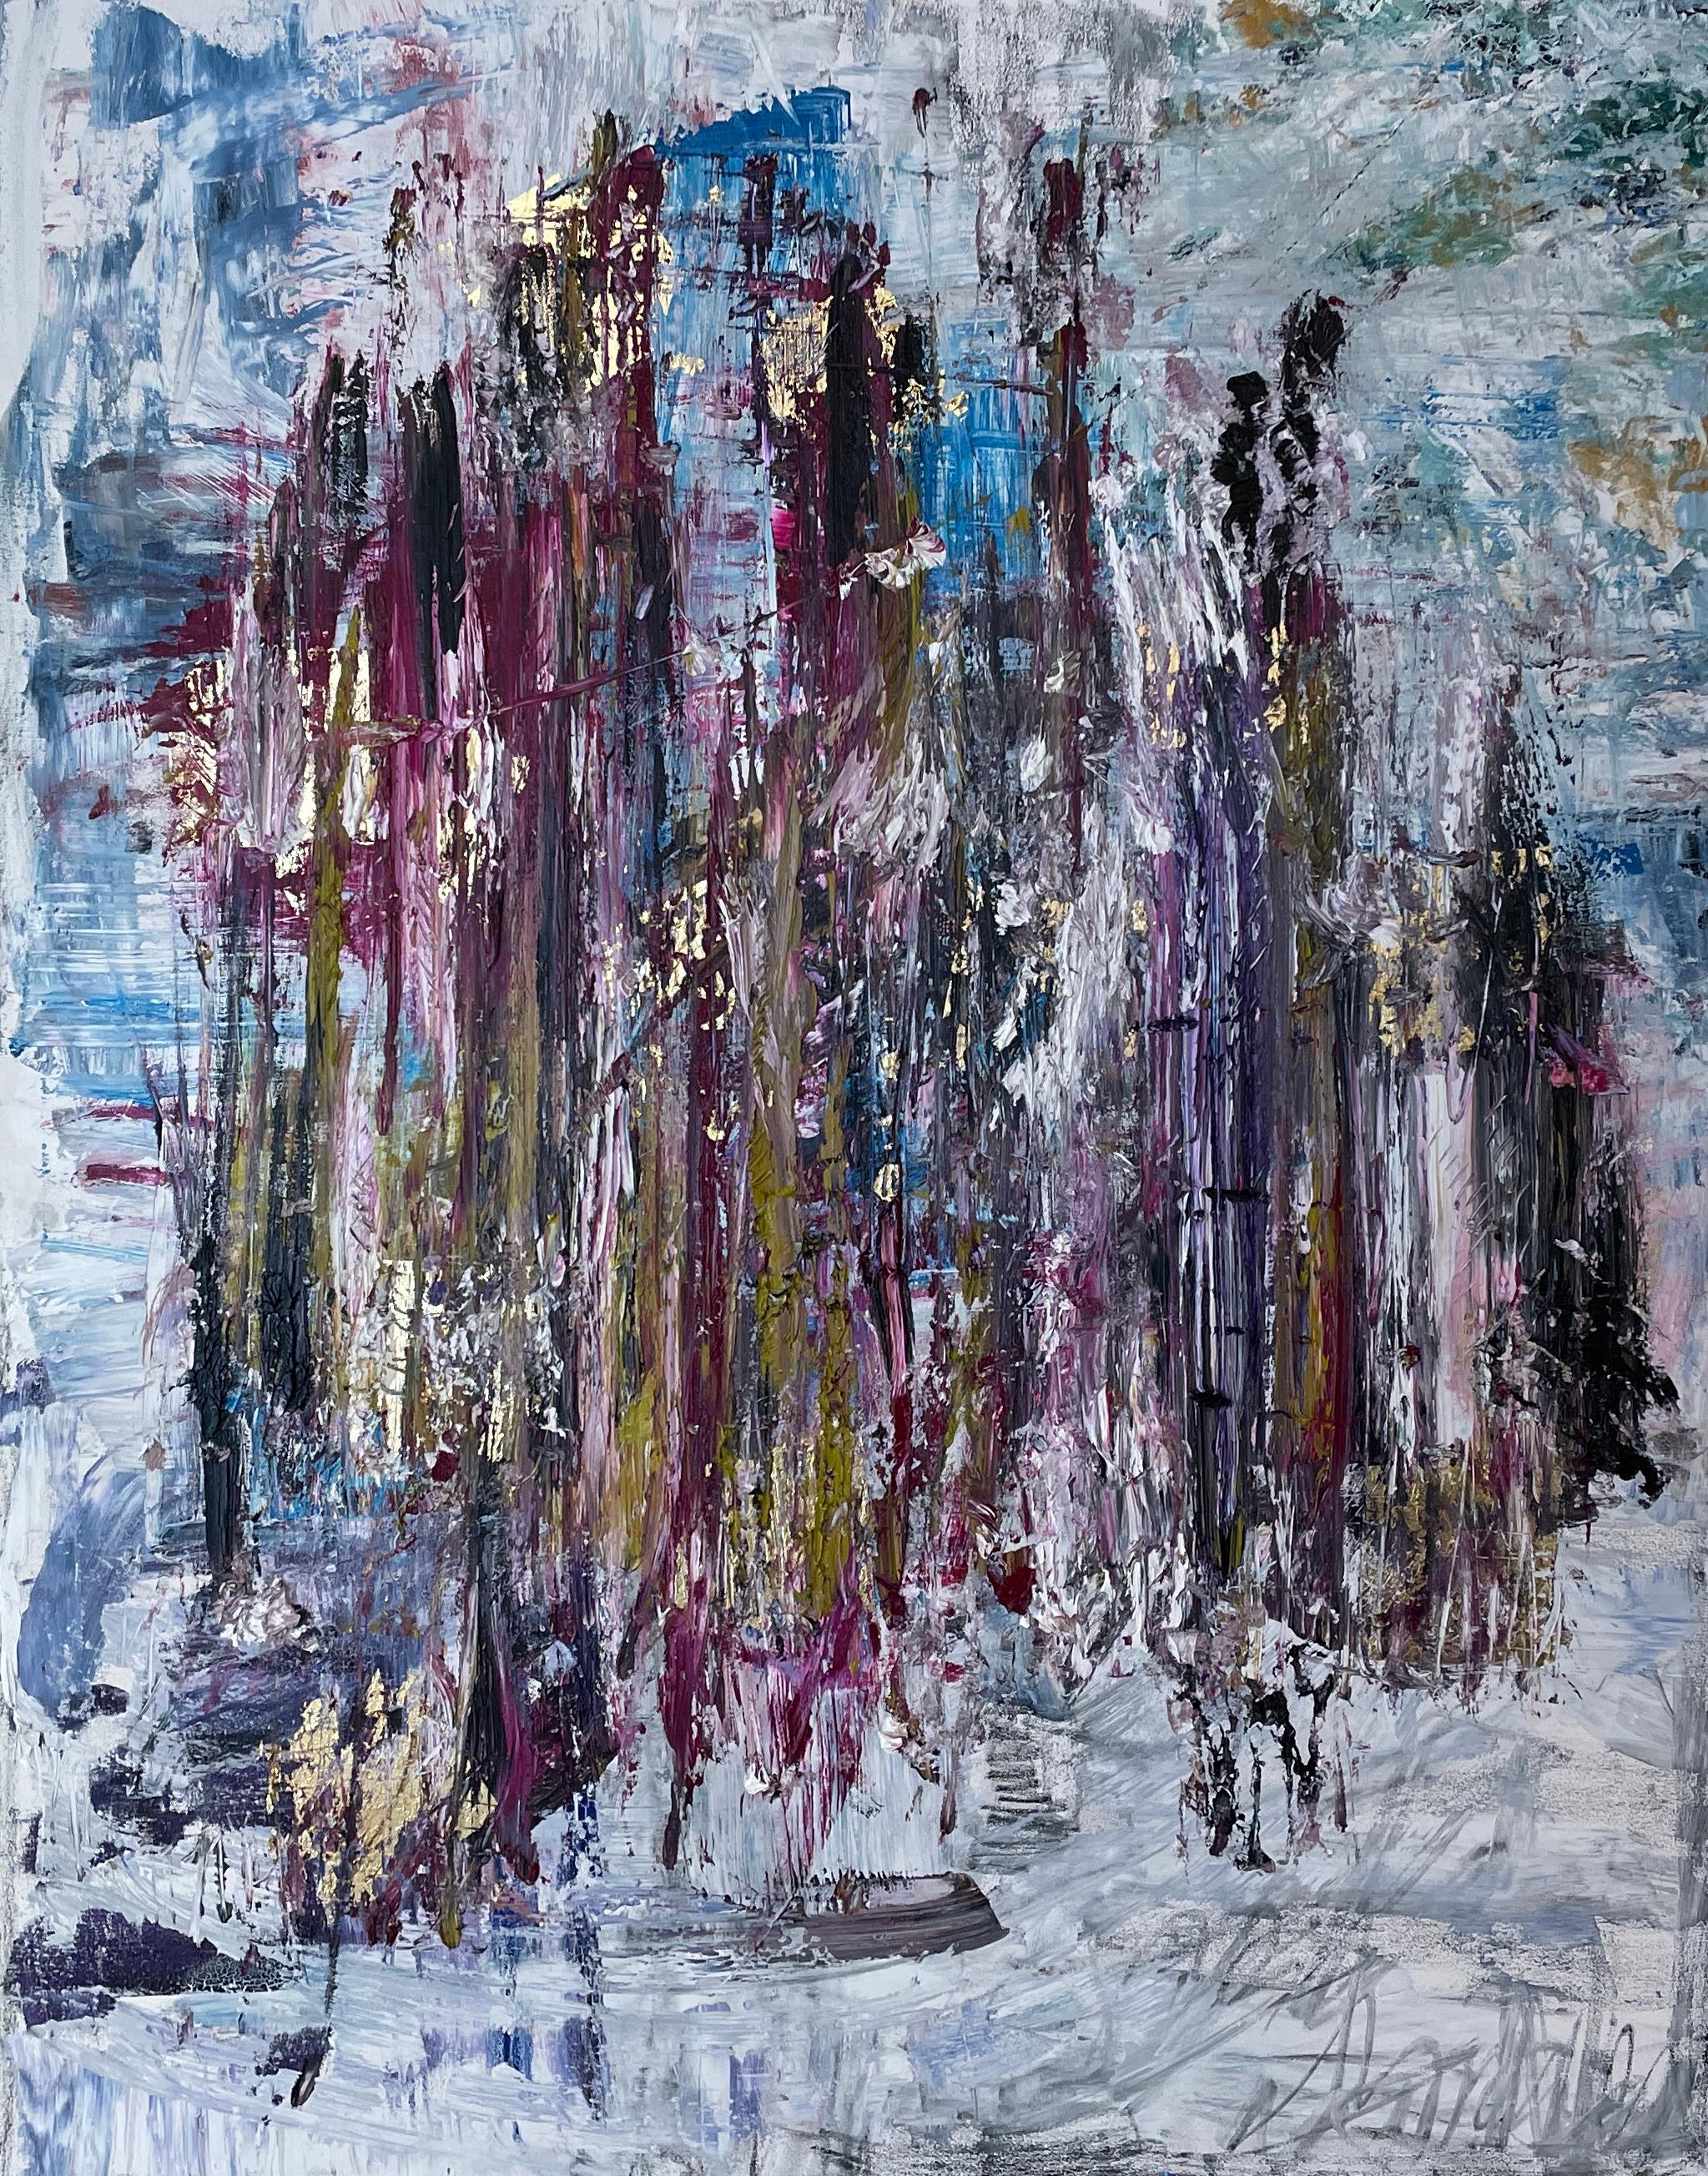 Frida Willis masterfully captures the essence of dynamic motion and raw energy in this striking 60" x 48" contemporary abstract. Aptly titled "Violet Midas", the artwork thrums with life, drawing the observer into its vortex of swirling colors and